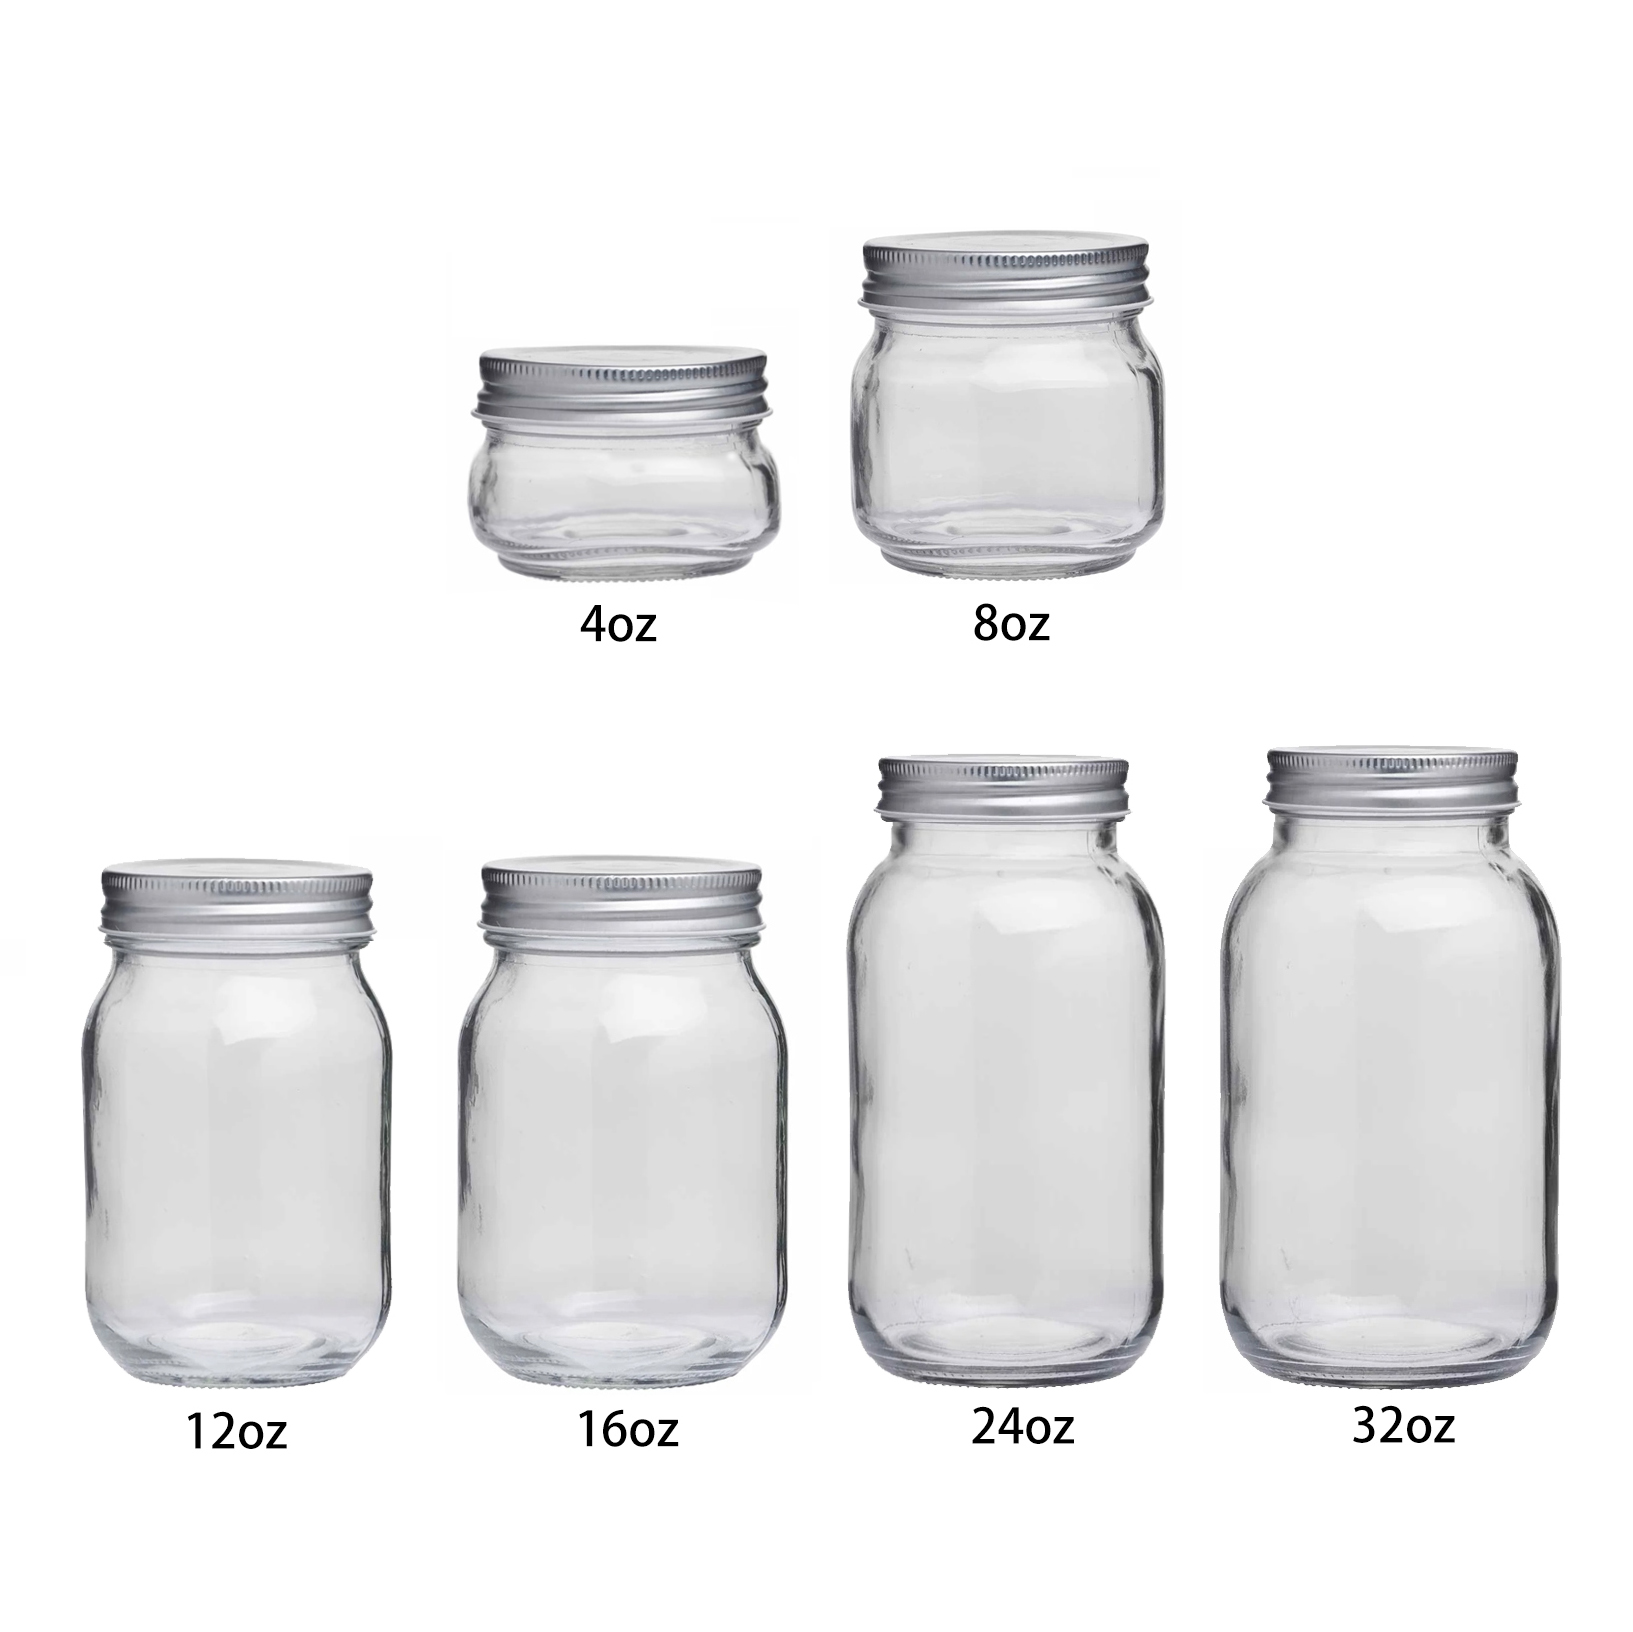 What Sizes Do Mason Jars Come In?